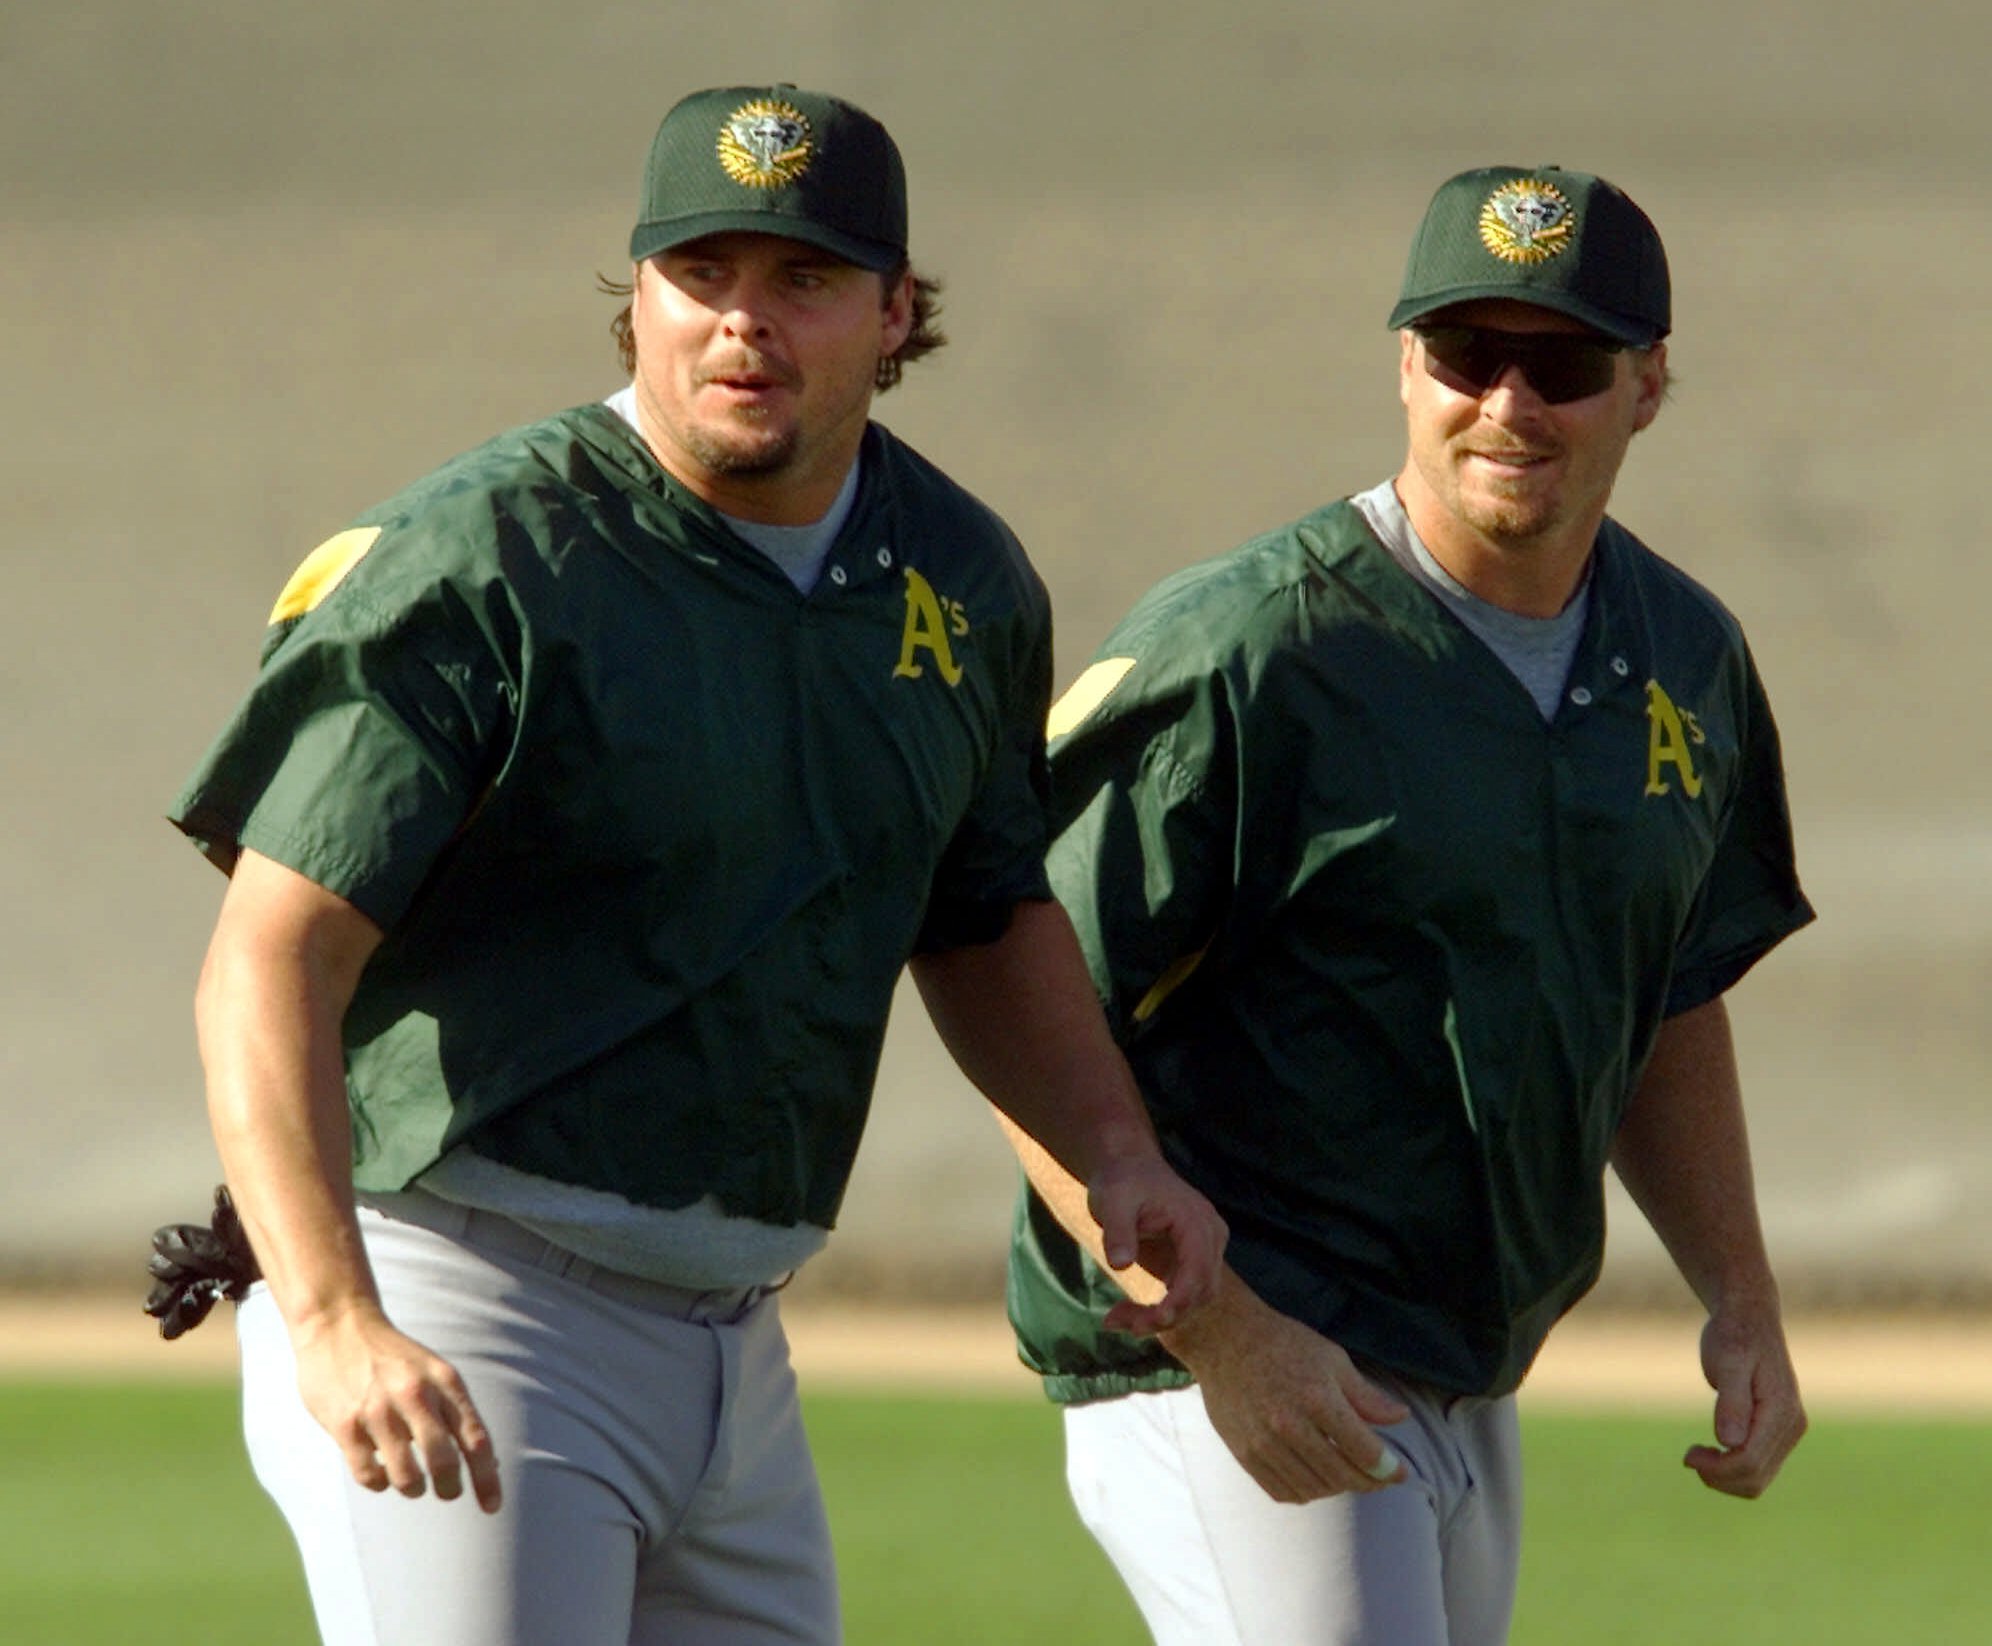 Jeremy Giambi has died at age 47 - Blowout Cards Forums